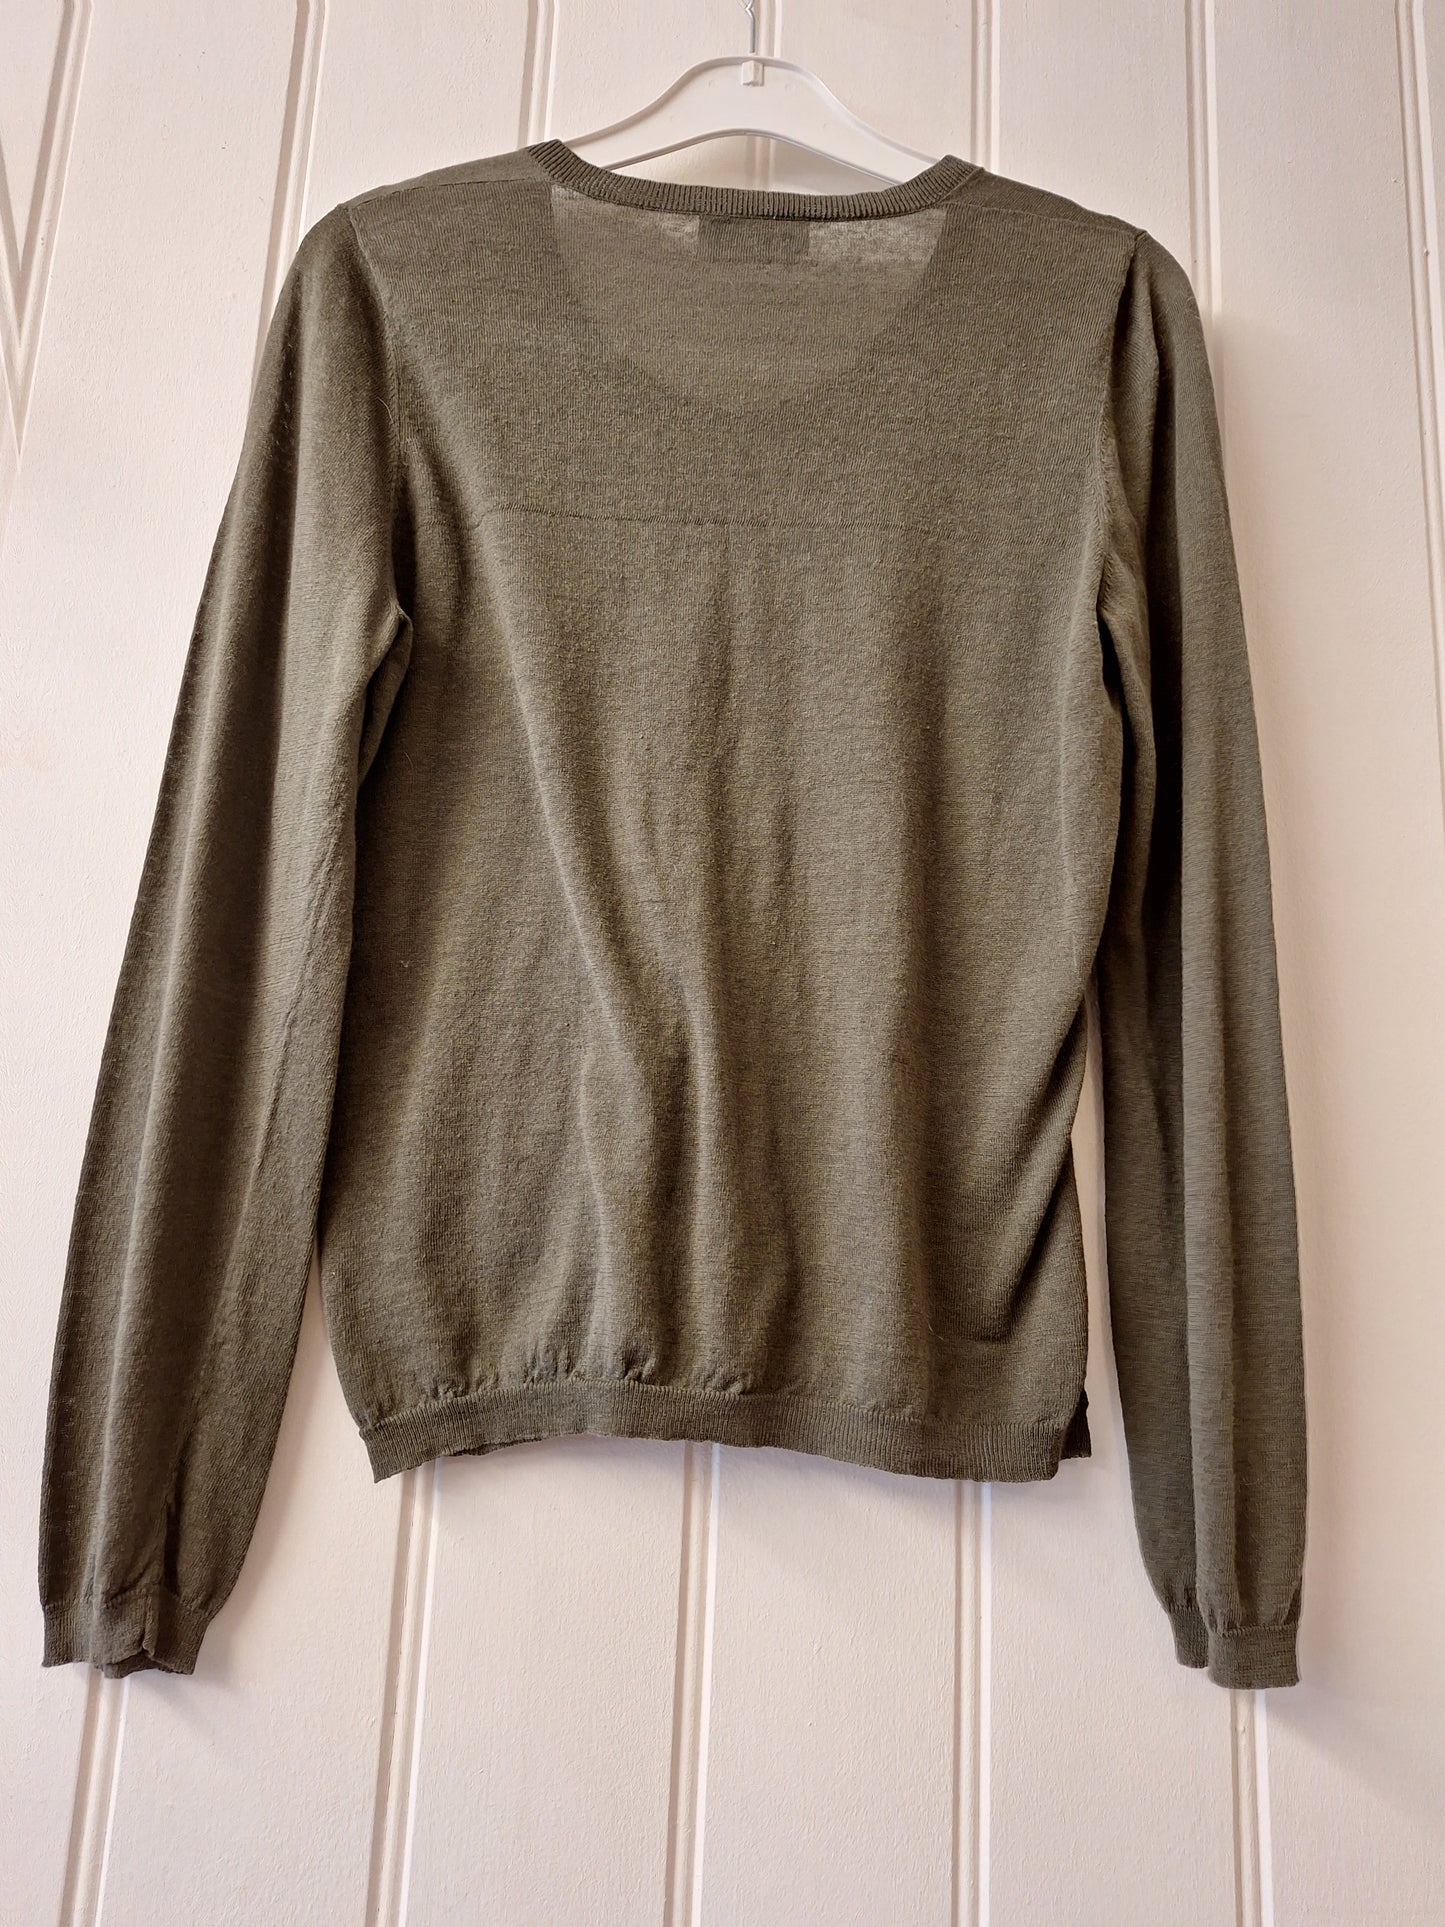 Brora linen and cotton knit S